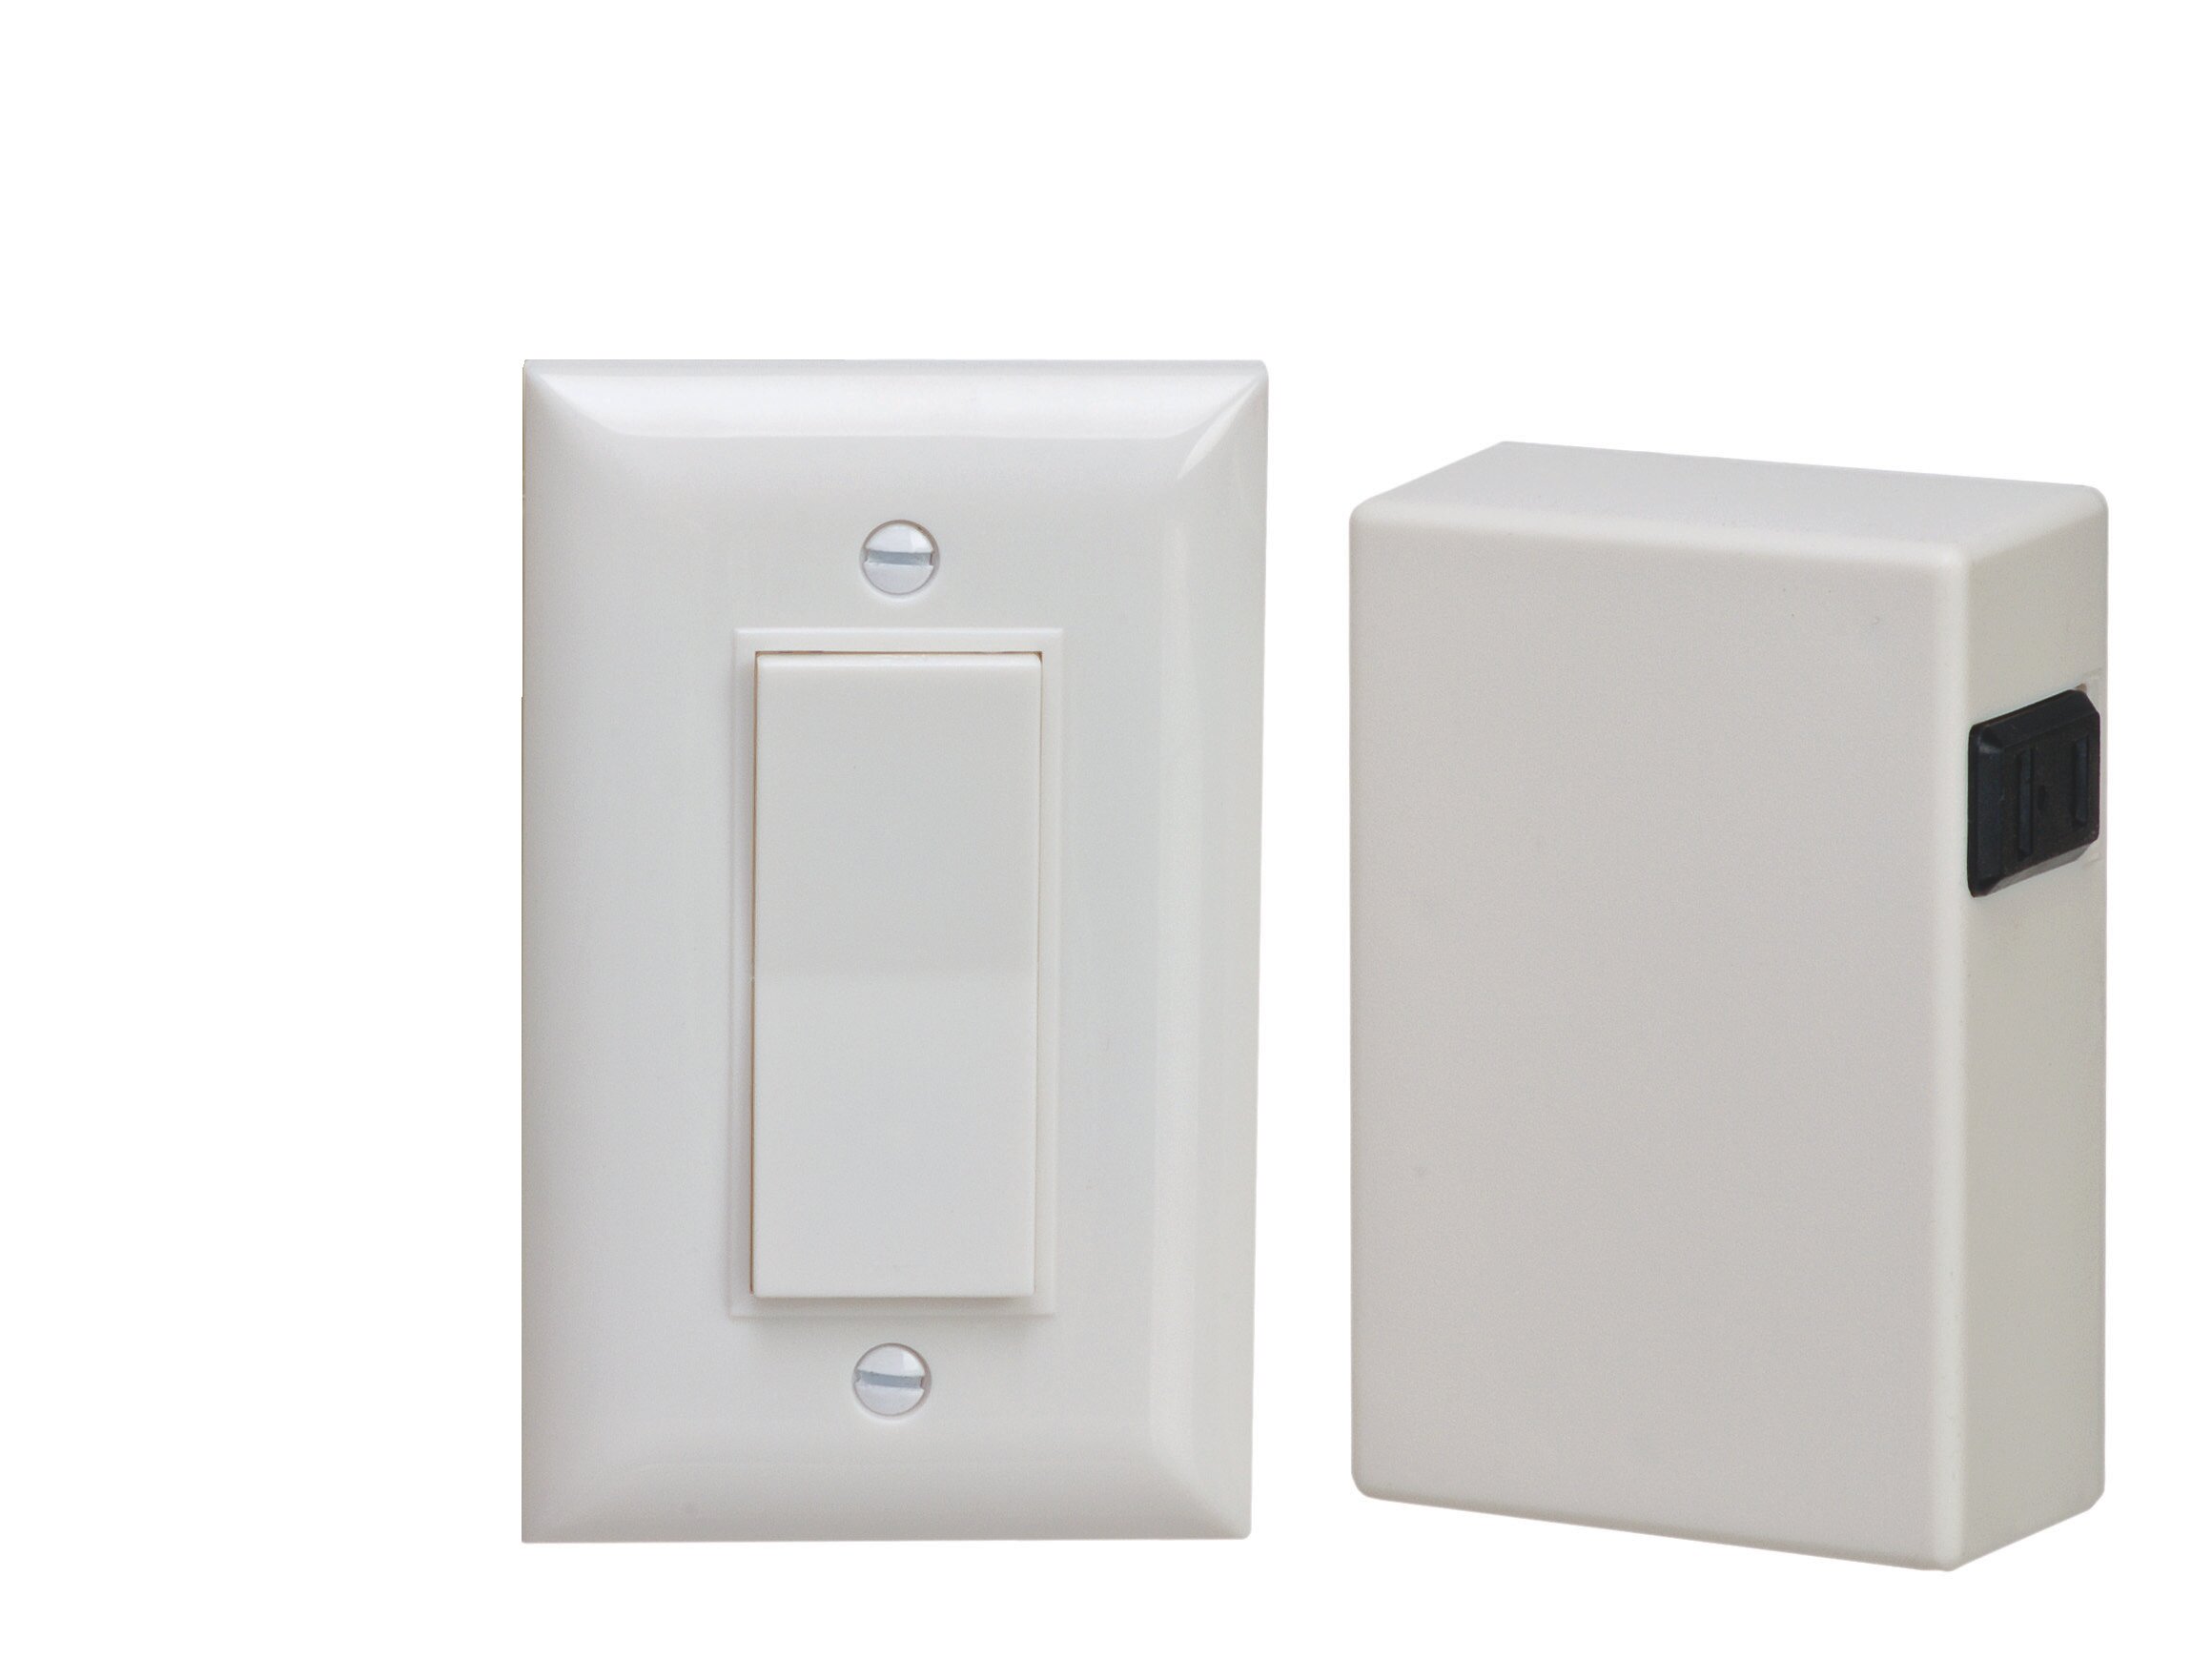 GE mySelectSmart Wireless Remote Control Light Switch 1 Outlet White